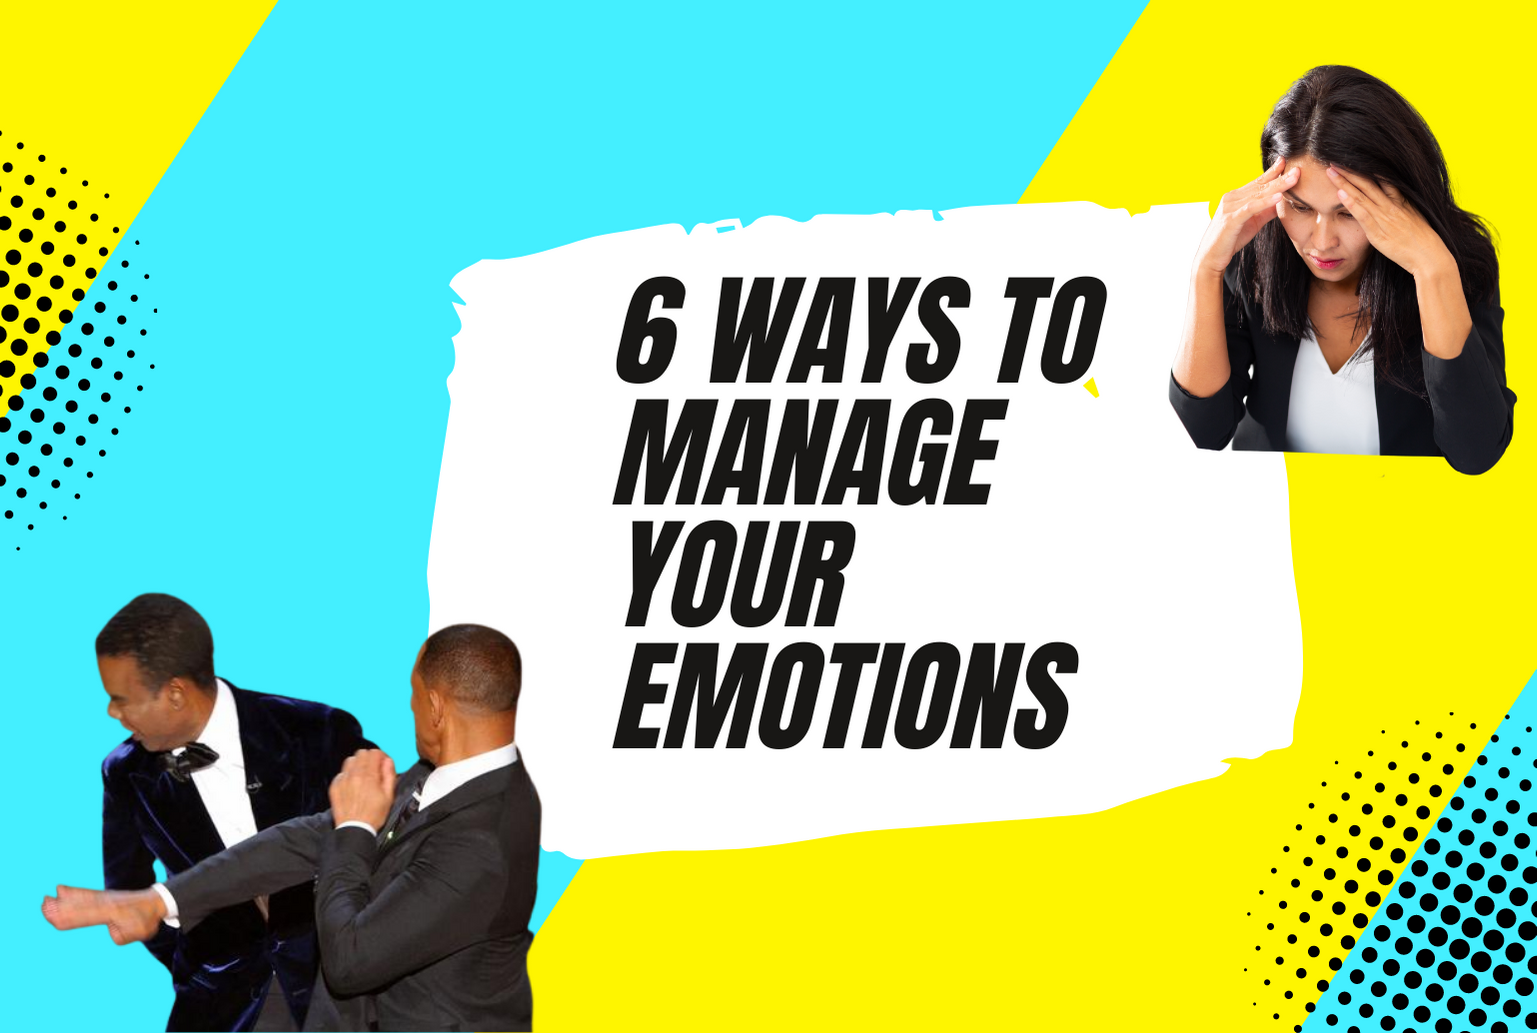 6 Ways to Manage Your Emotions